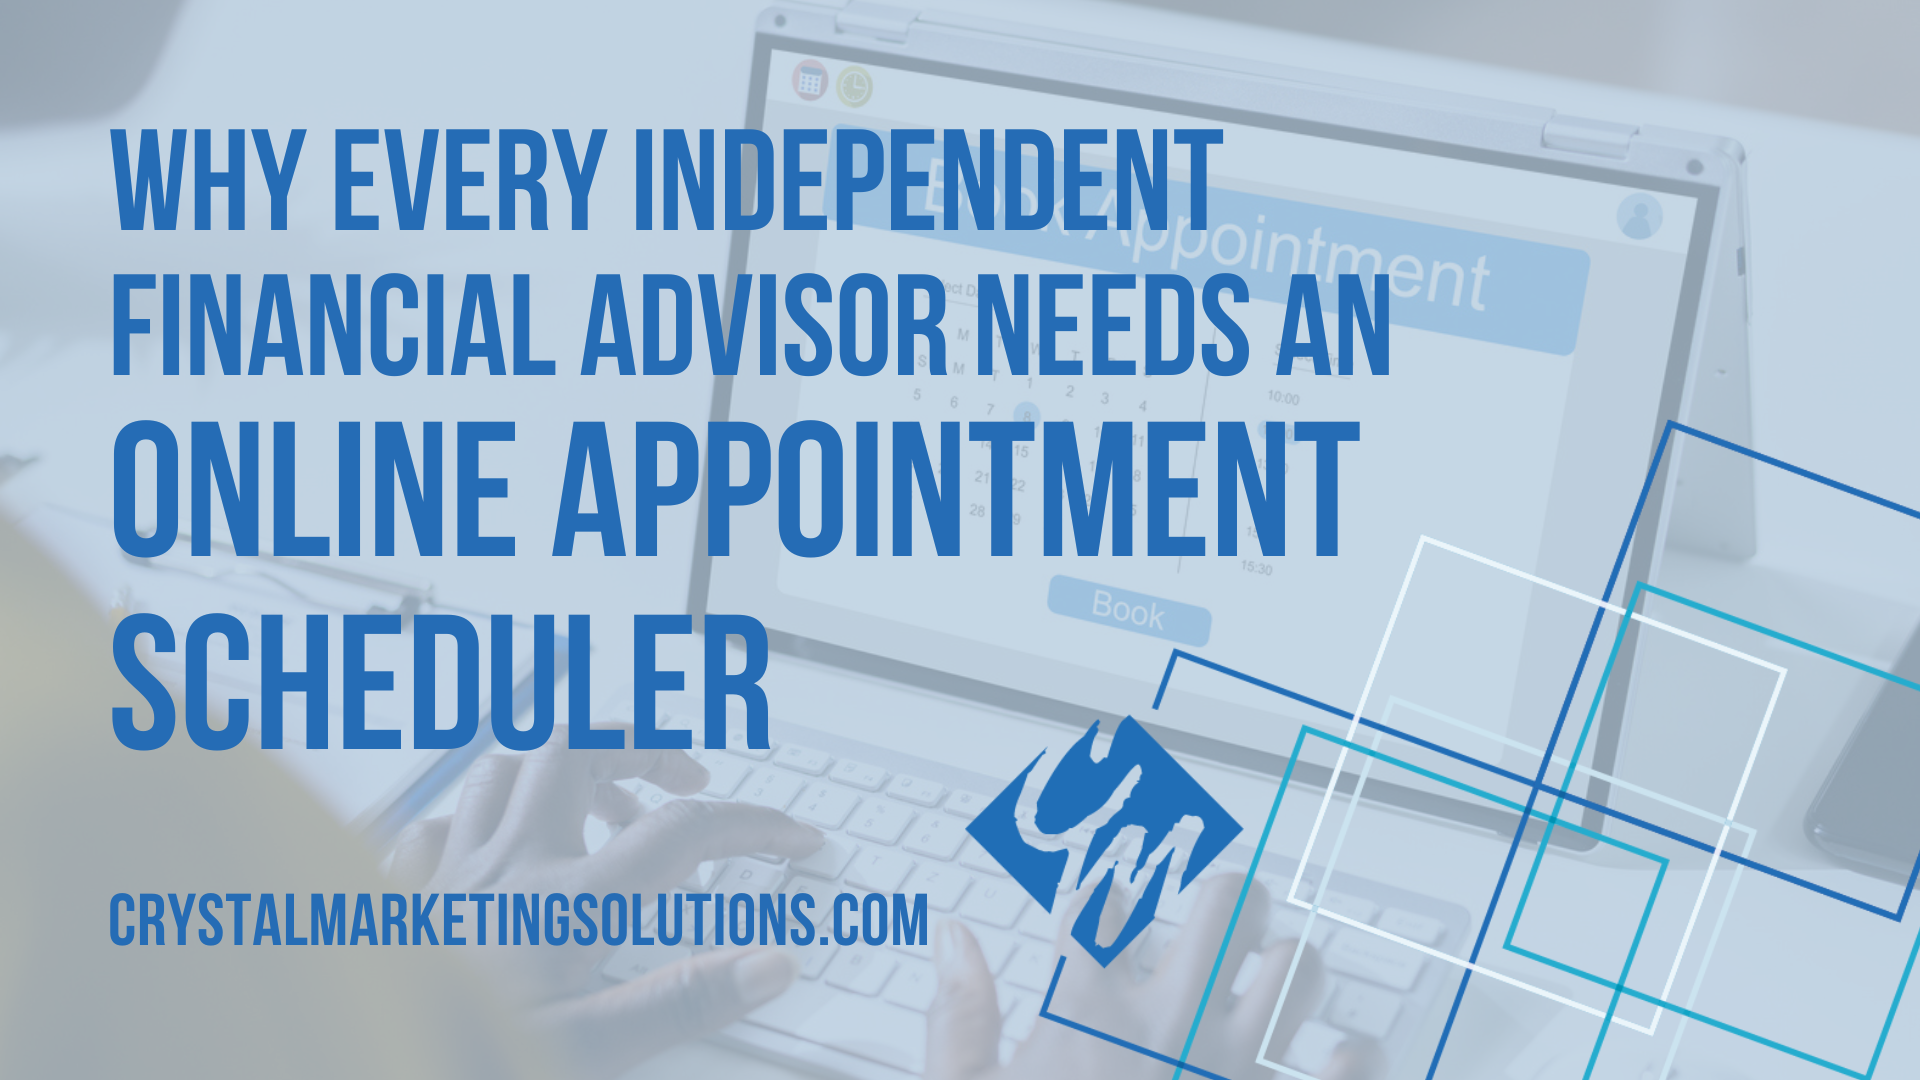 Why Every Independent Financial Advisor Needs an Online Appointment Scheduler